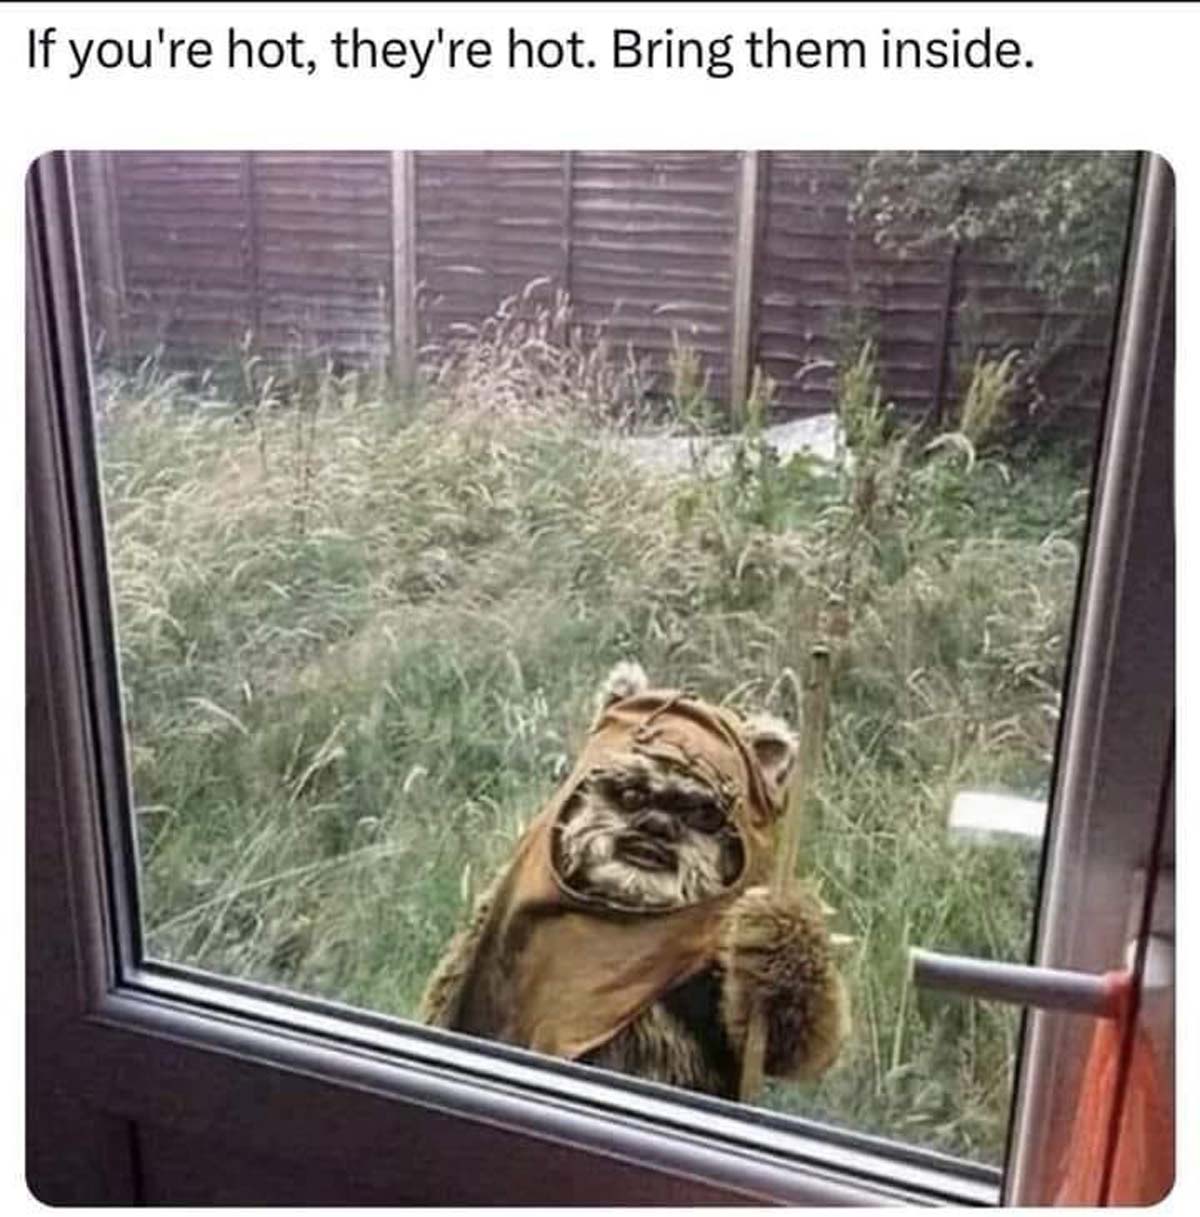 endor star wars meme - If you're hot, they're hot. Bring them inside.